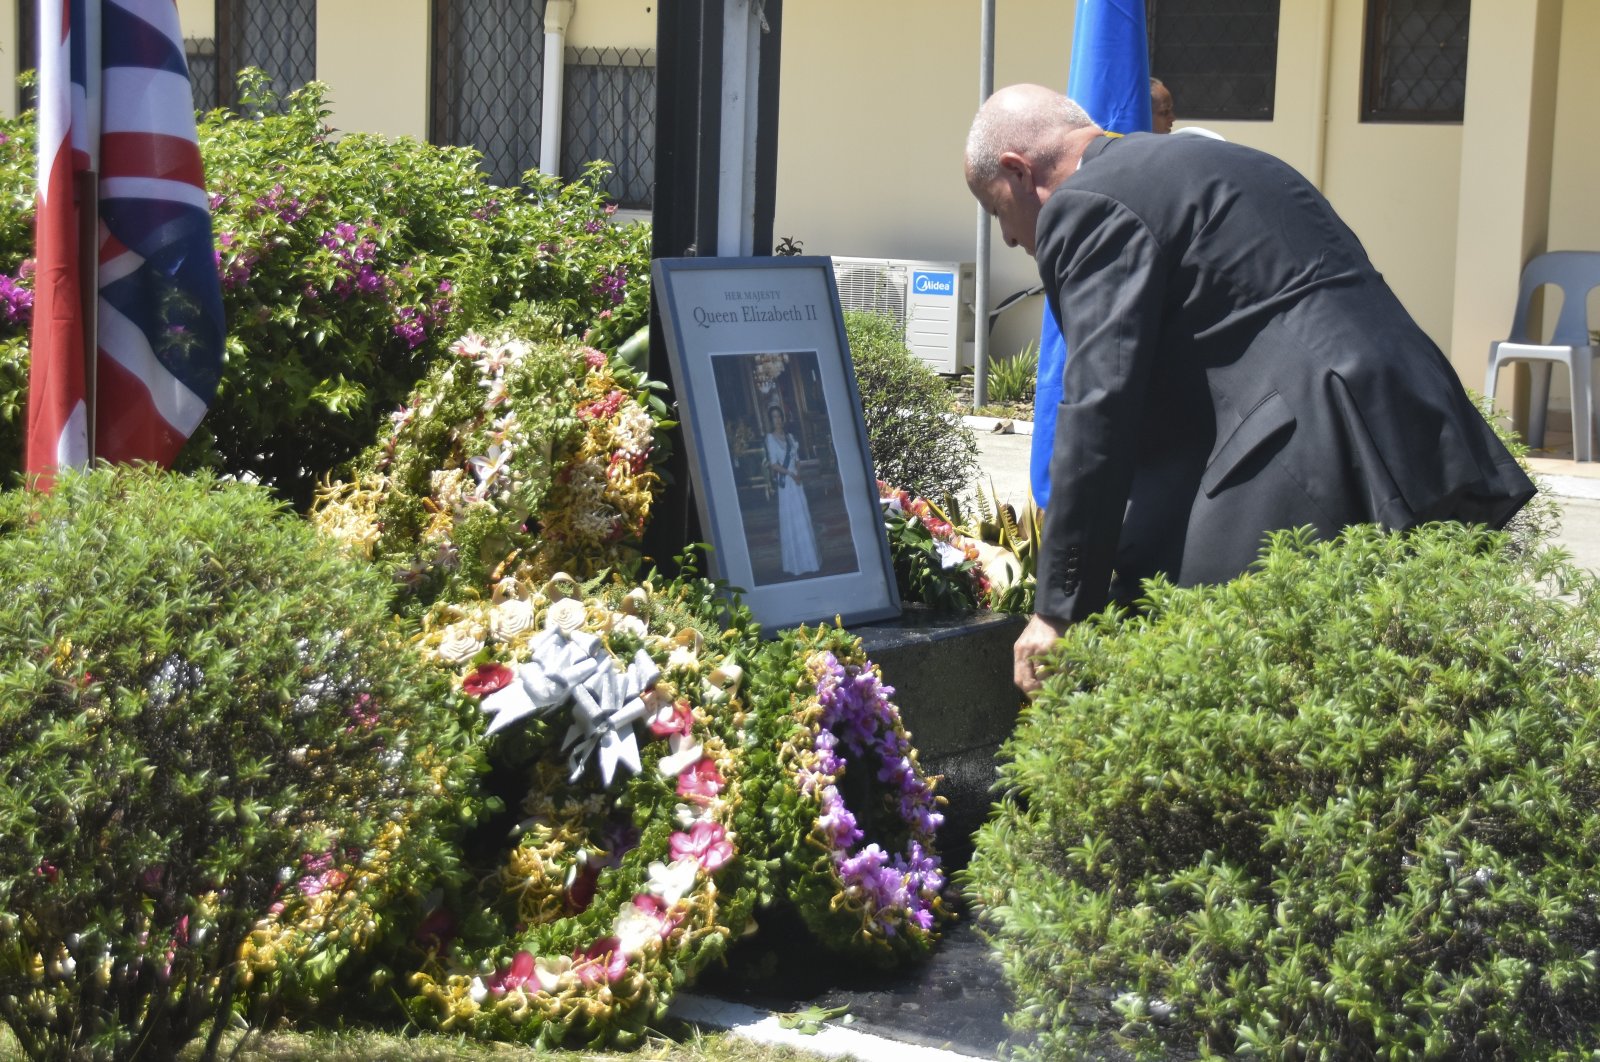 New Zealand High Commissioner to the Solomon Islands, Jonathon Schwass lays a wreath at Government House in Honiara, Solomon Island, during a ceremony to mark the passing of Queen Elizabeth II, Sept. 12, 2022. (AP Photo/Charley Piringi)